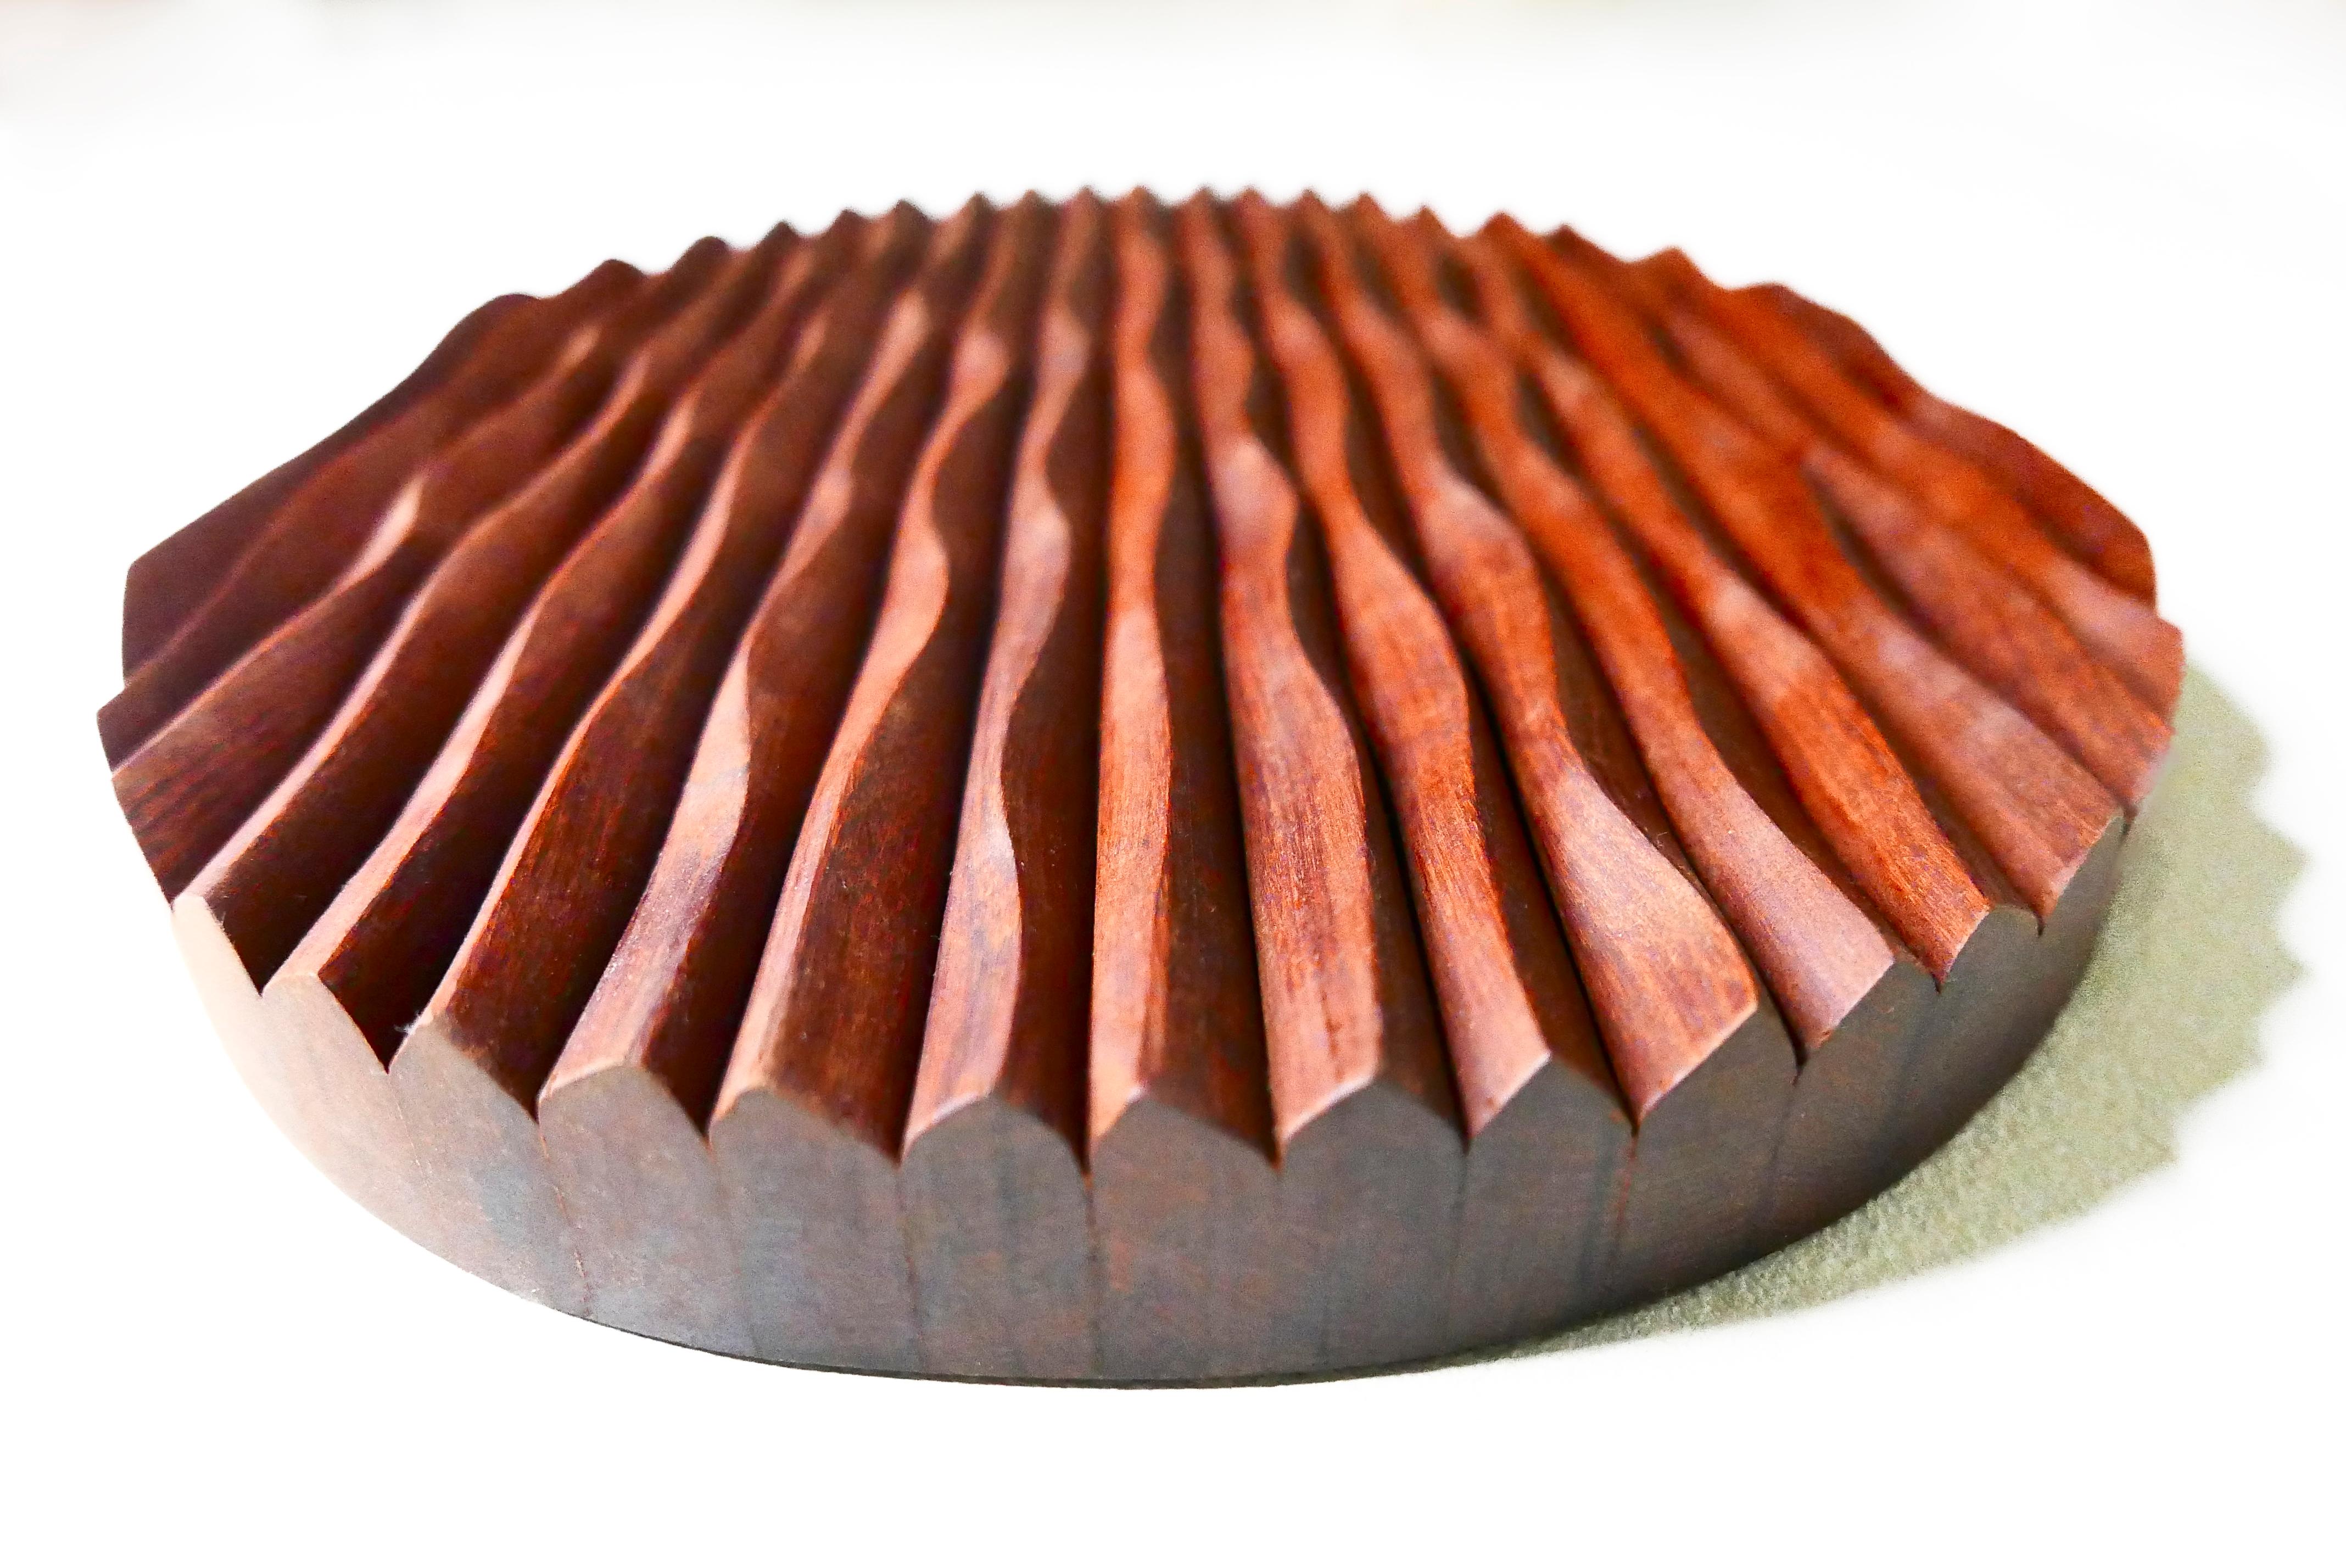 A piece from the 'Ripples' abstract sculpture series by James Rowland made from Brazilian hard wood Ipê.

Scottish Artist and furniture Designer-Maker James Rowland of Knót Artesanal is treading a new path in search of organic forms inspired by